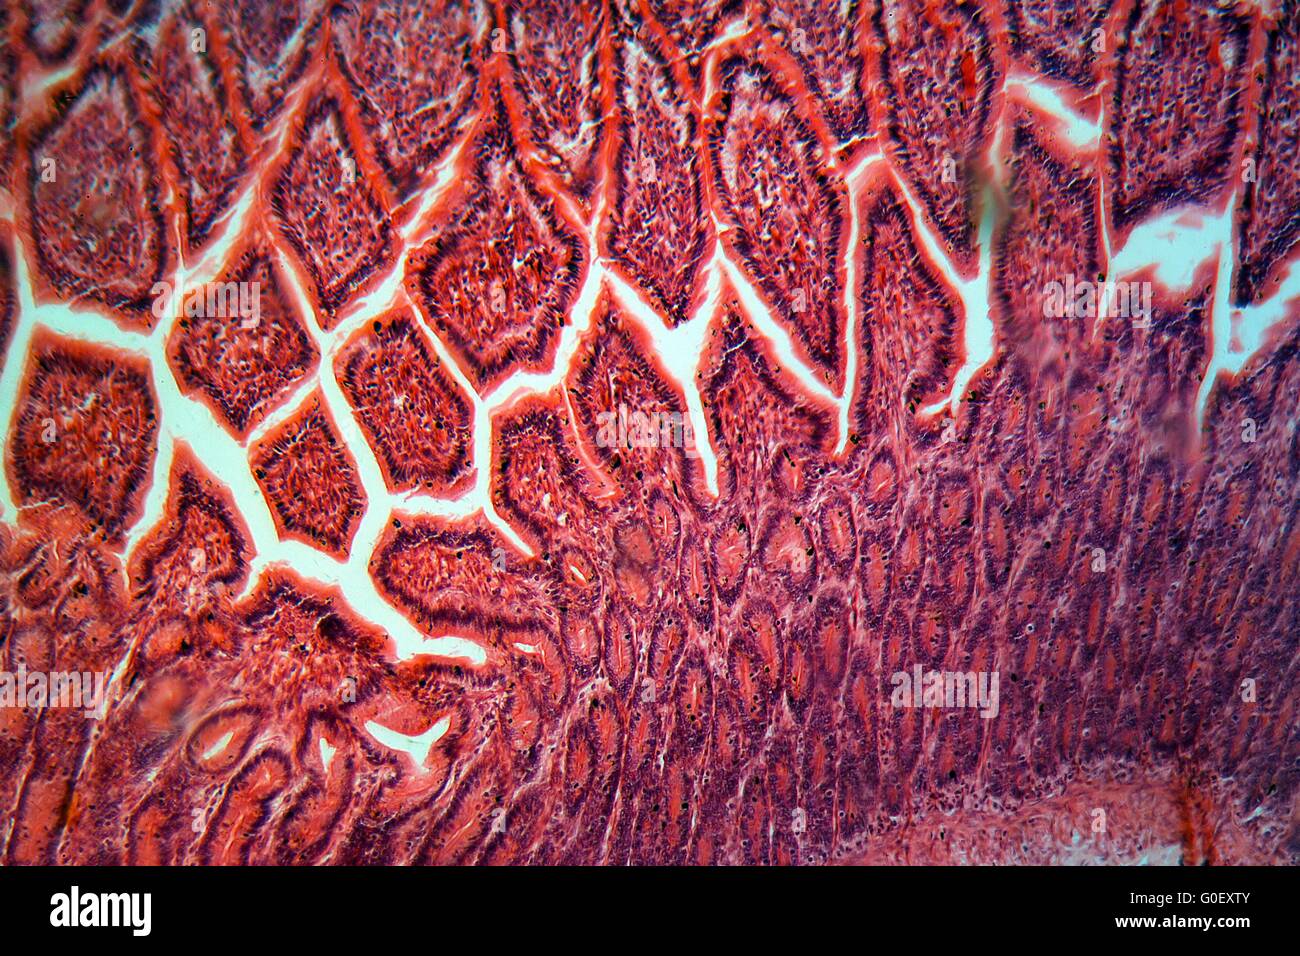 A section trough cells of a small intestine under the microscope. Stock Photo